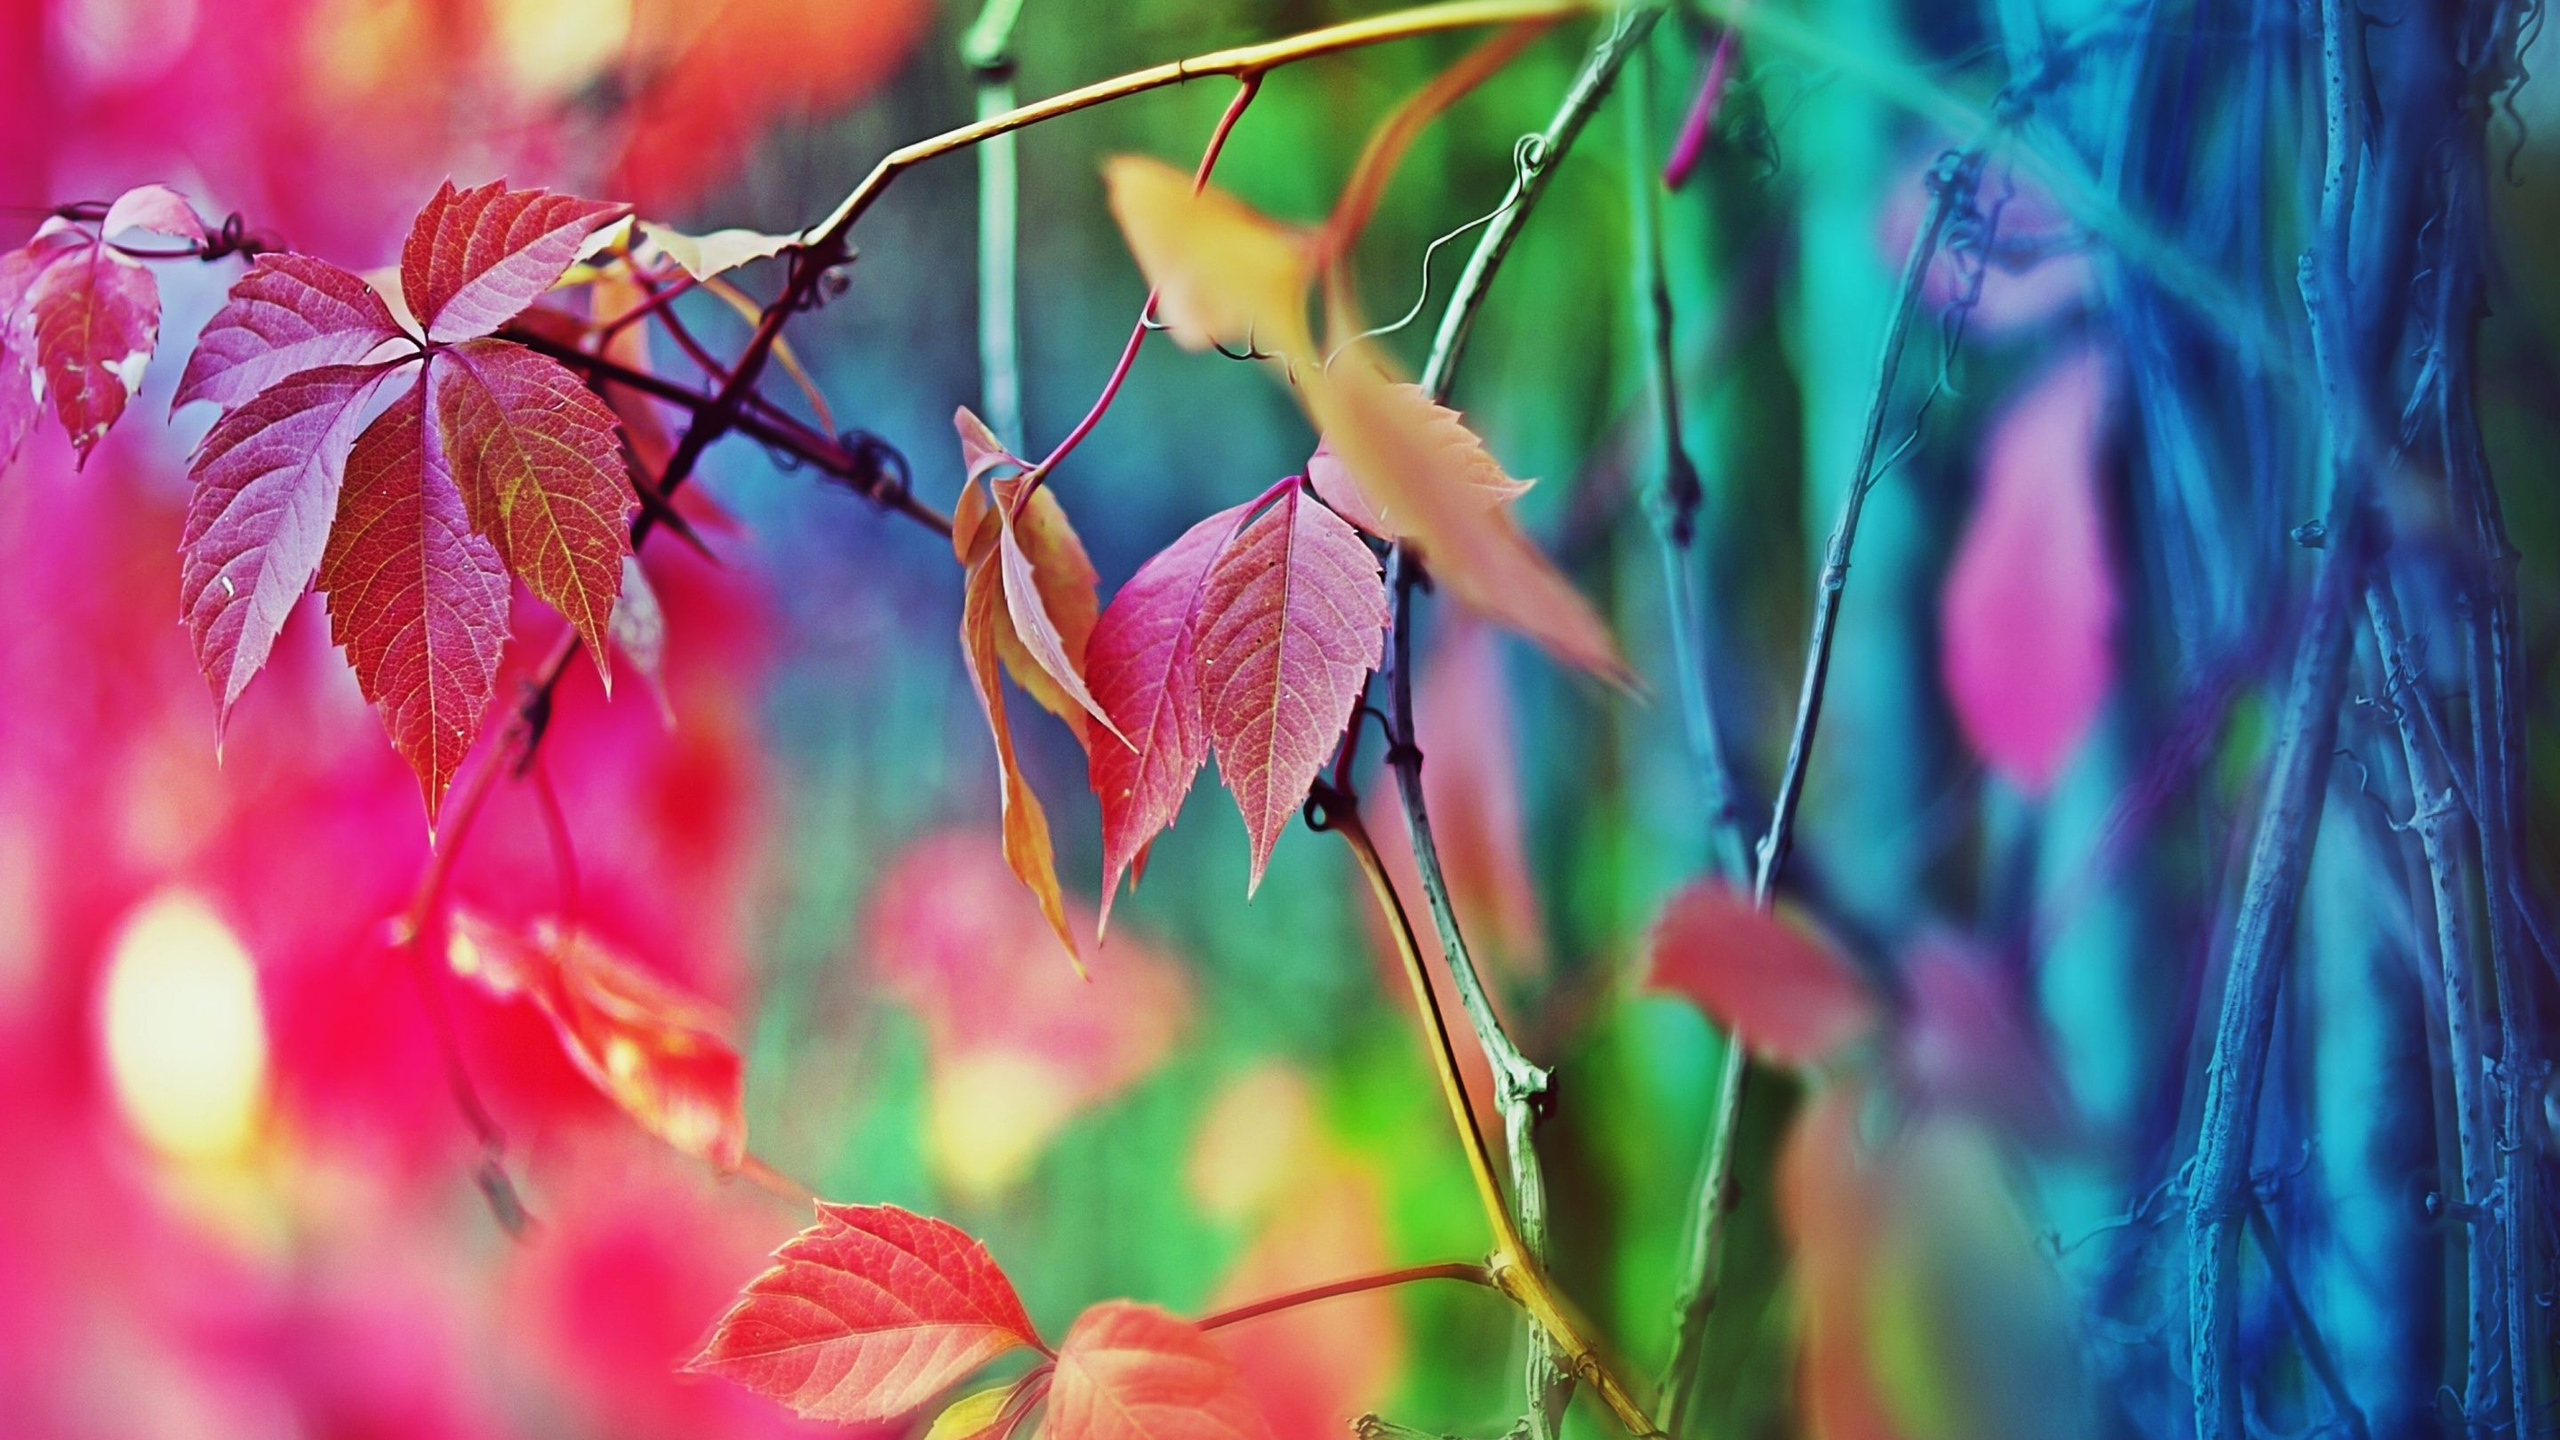 Colorful Leaves Plants In Blur Wallpaper 2K Colorful